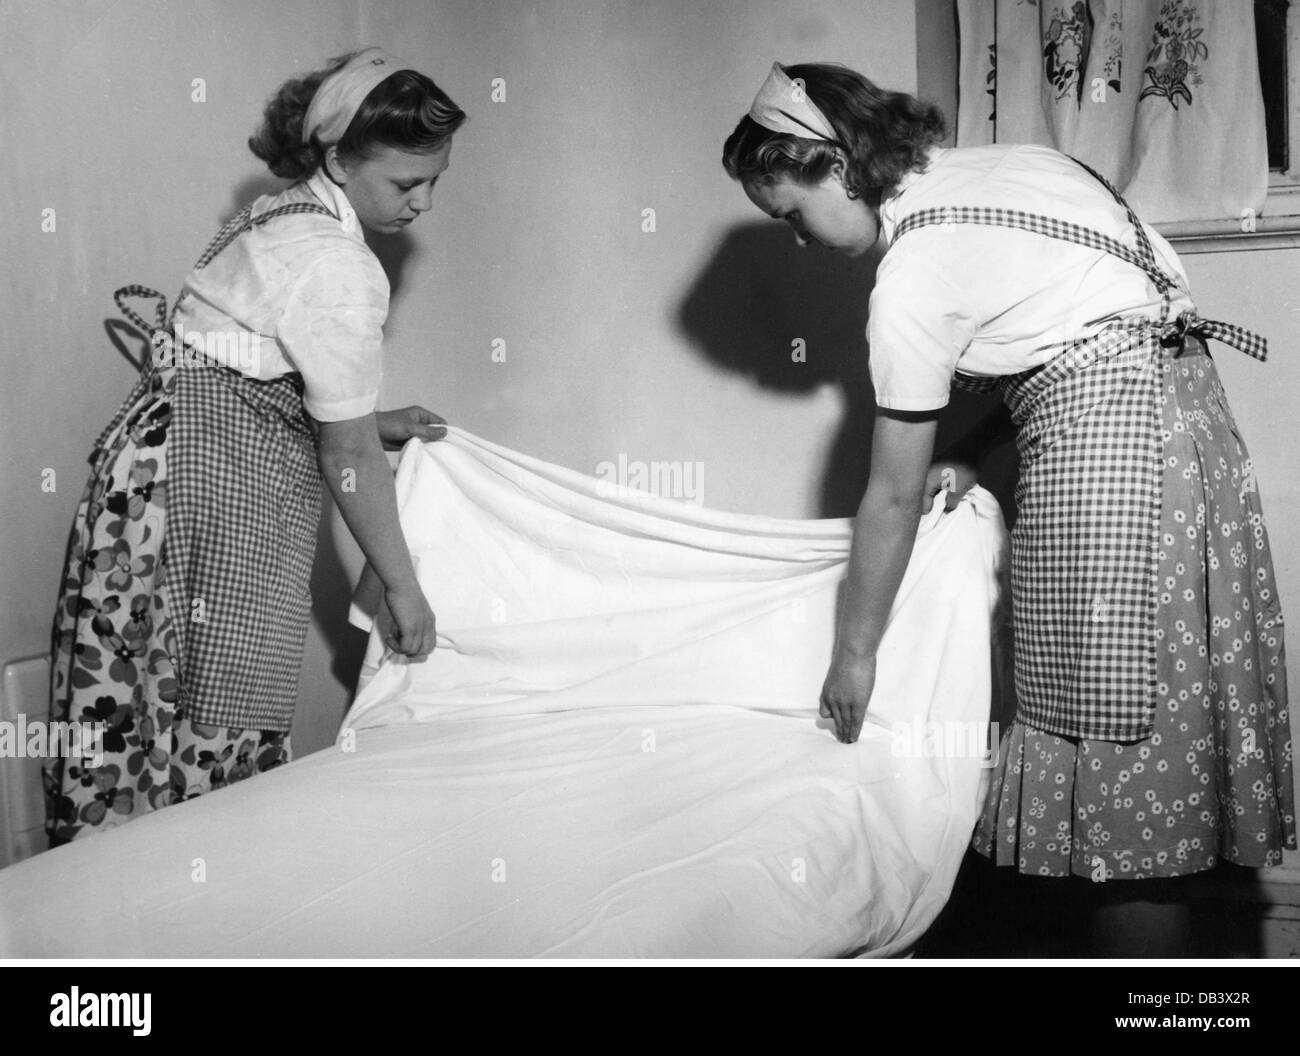 household, domestic science school, schoolgirls making bed, Great Britain, 1950s, Additional-Rights-Clearences-Not Available Stock Photo